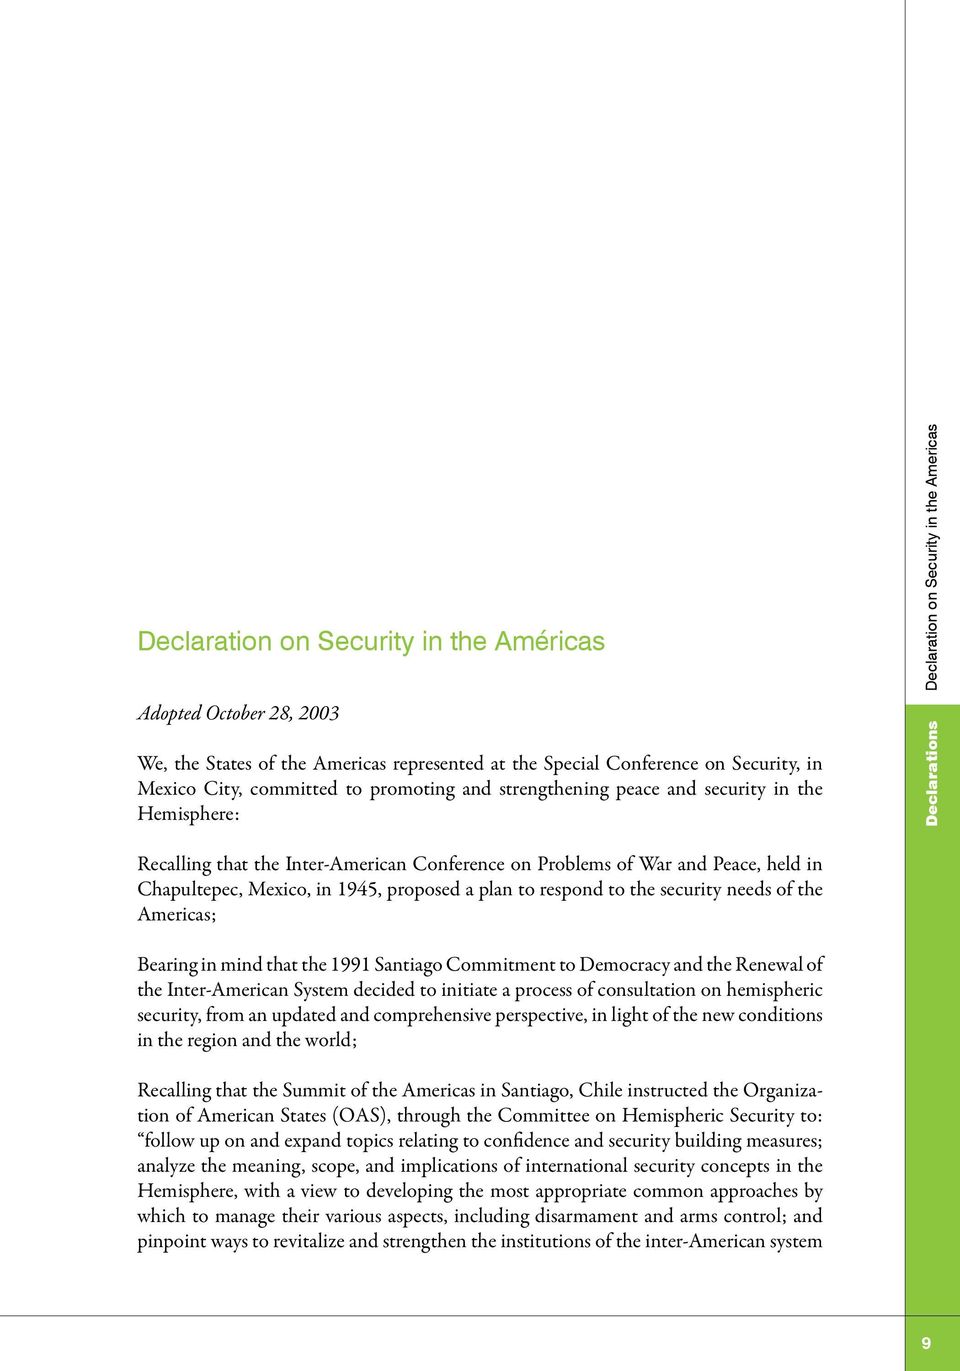 Chapultepec, Mexico, in 1945, proposed a plan to respond to the security needs of the Americas; Bearing in mind that the 1991 Santiago Commitment to Democracy and the Renewal of the Inter-American